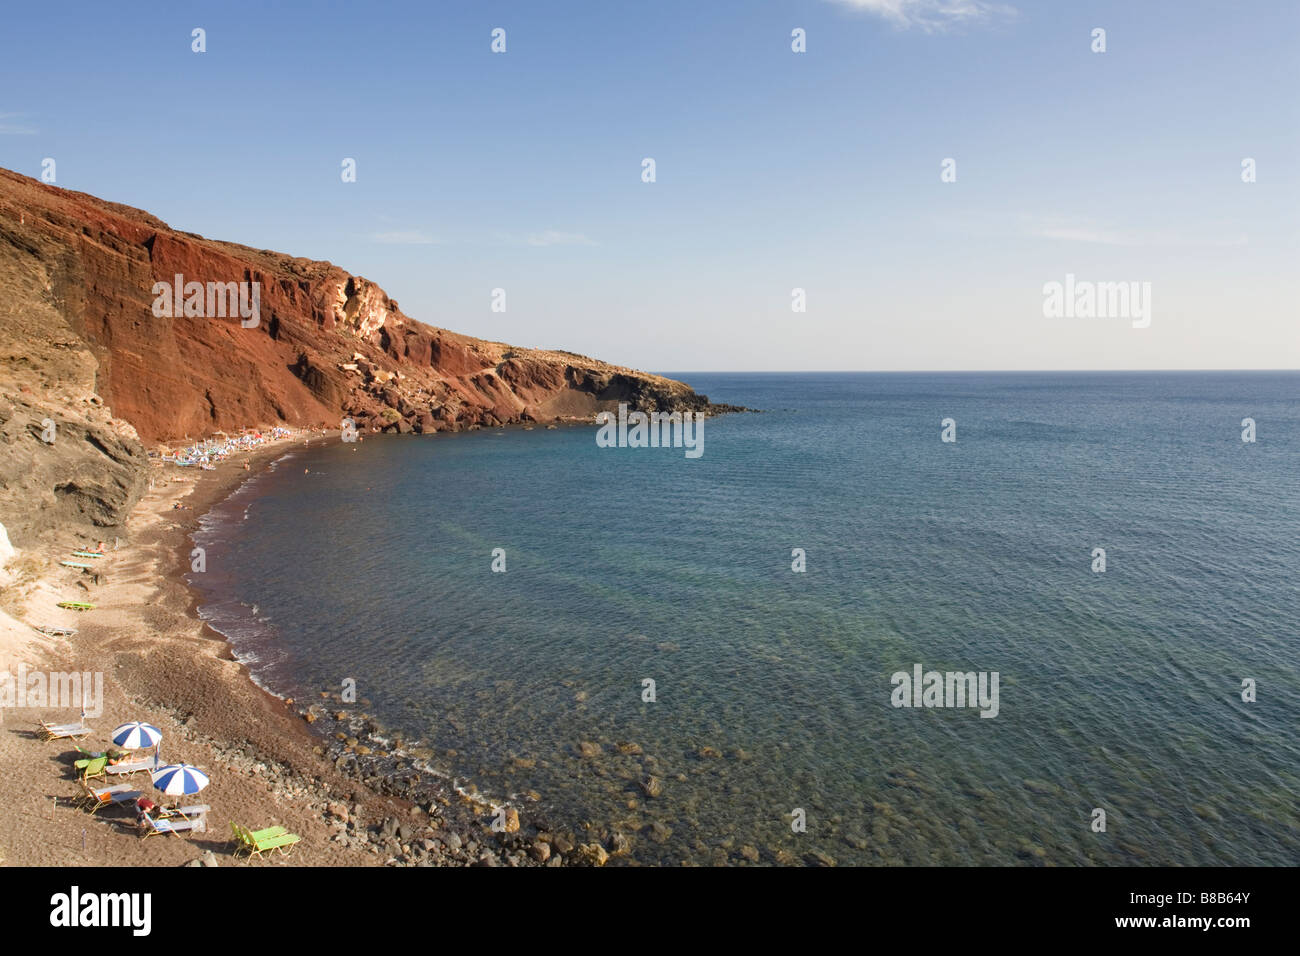 Shot from a high viewpoint of Santorini's volcanic and rocky Red Beach, Akrotiri, Santorini, Cyclades, Greece. Stock Photo